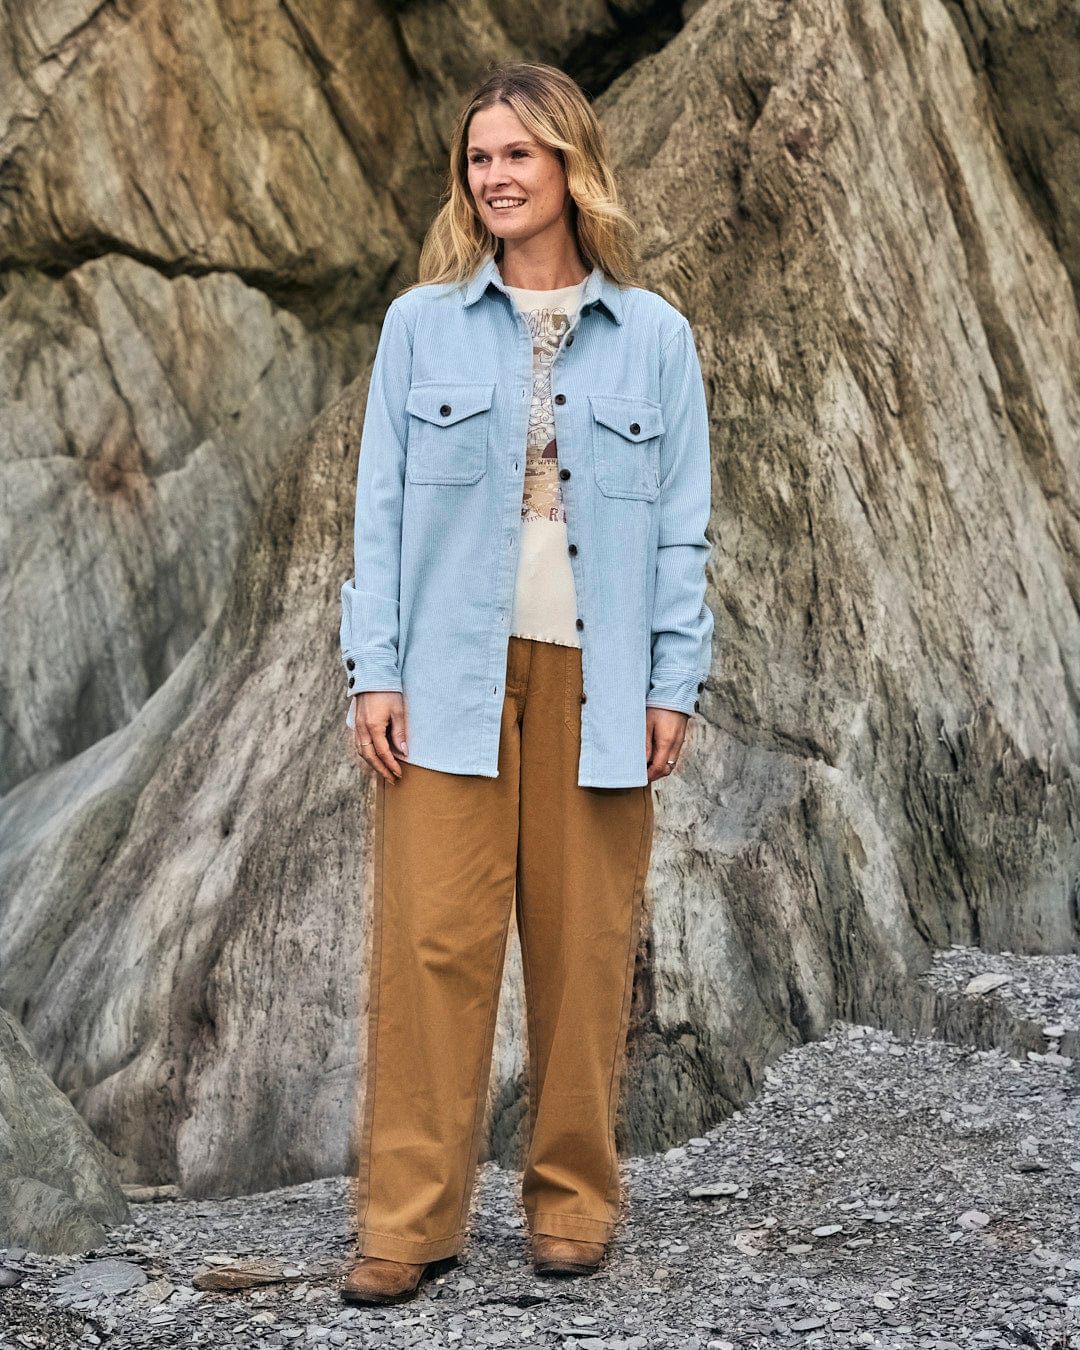 A woman is standing in front of rocks wearing a blue Saltrock Maddox - Womens Cord Shirt - Light Blue.